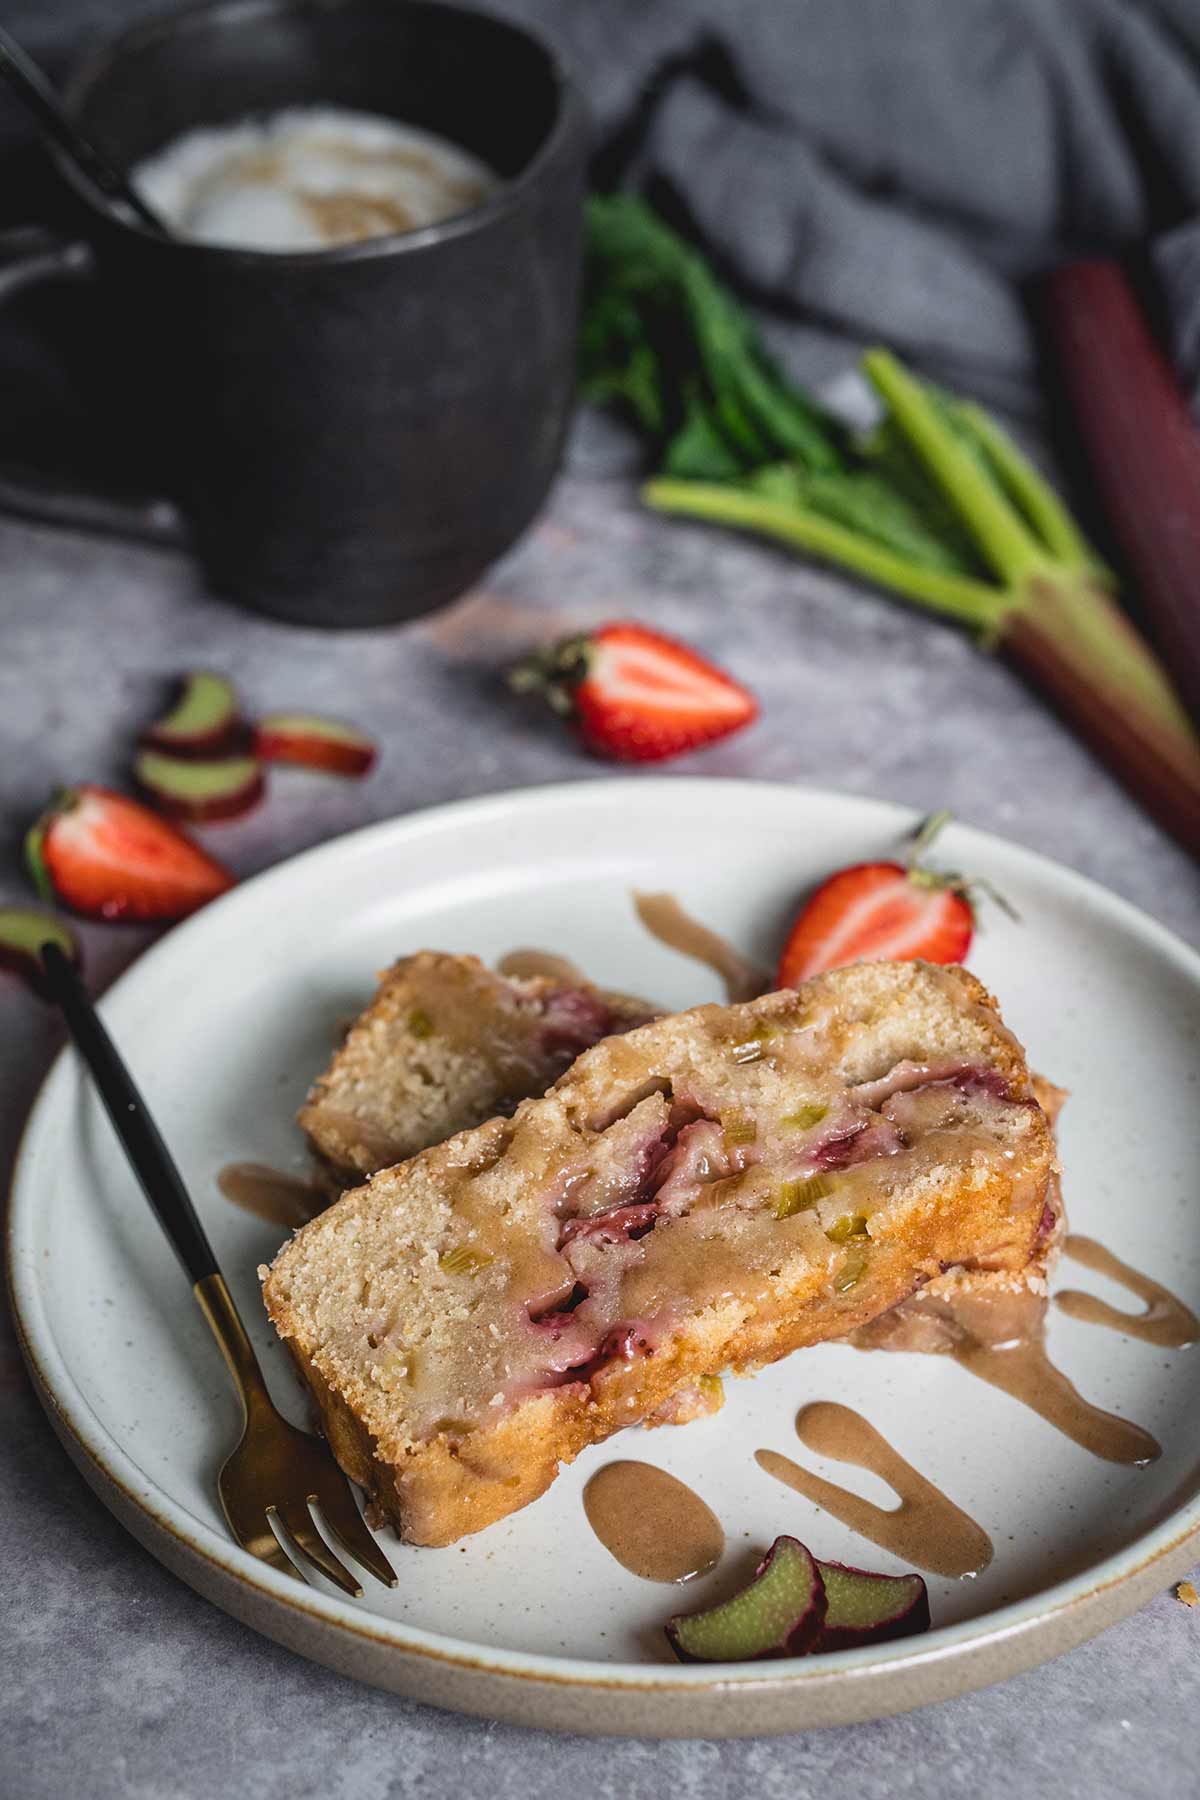 A slice of the rhubarb strawberry bread